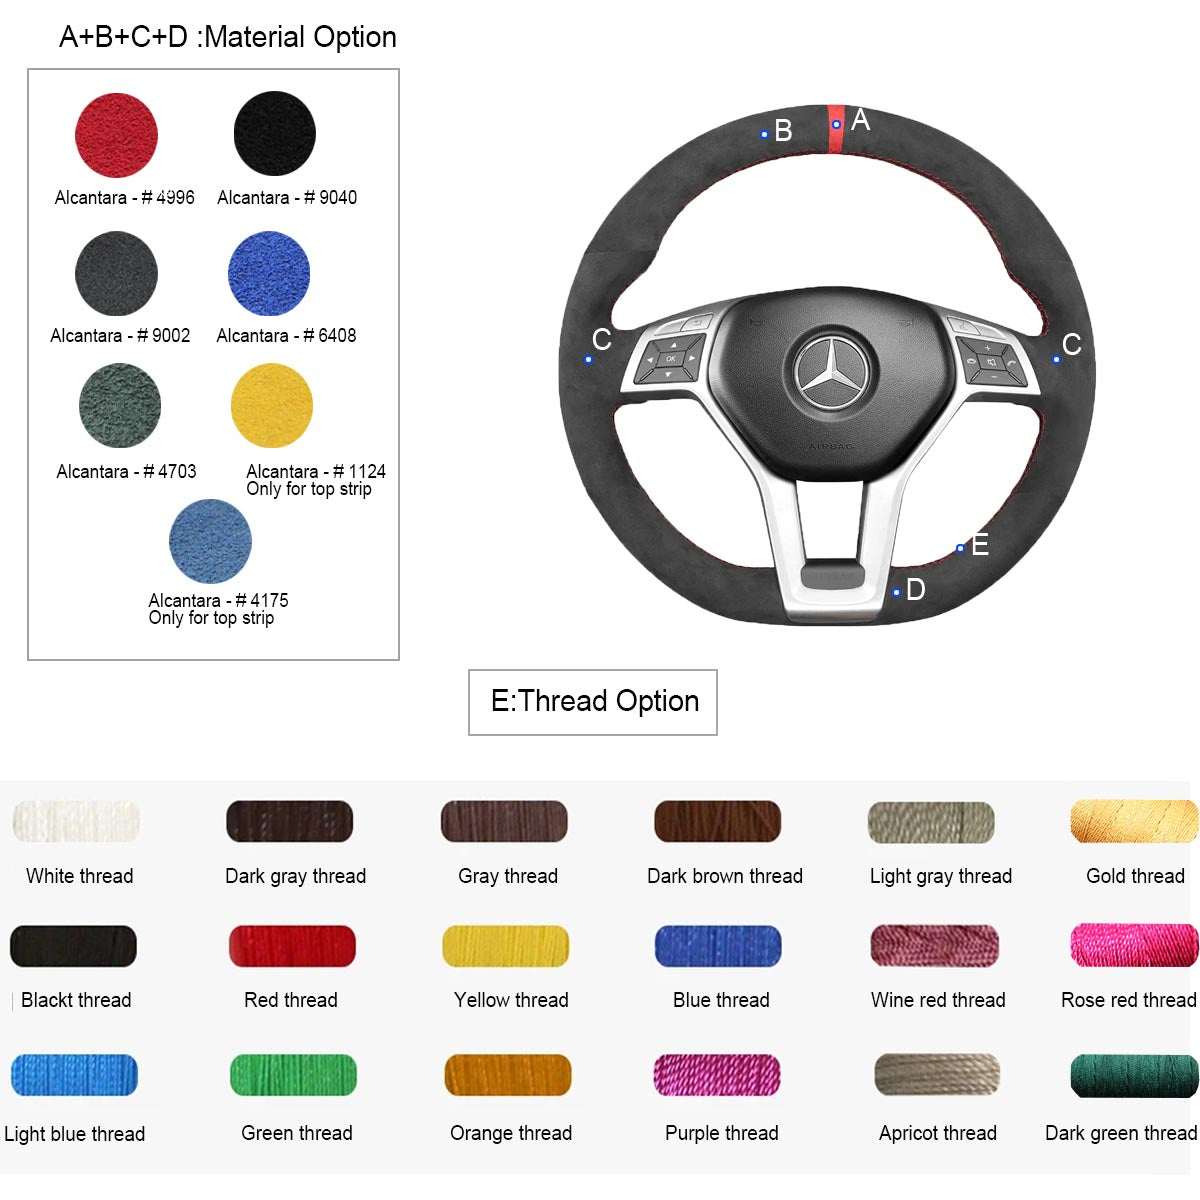 LQTENLEO Alcantara Leather Suede Hand-stitched Car Steering Wheel Cover for Mercedes-benz C-Class W204 / E-Class W212 / CLS-Class C218 / GLA 45 AMG X156 / SL-Class R231 / SLK-Class R172 2012-2016